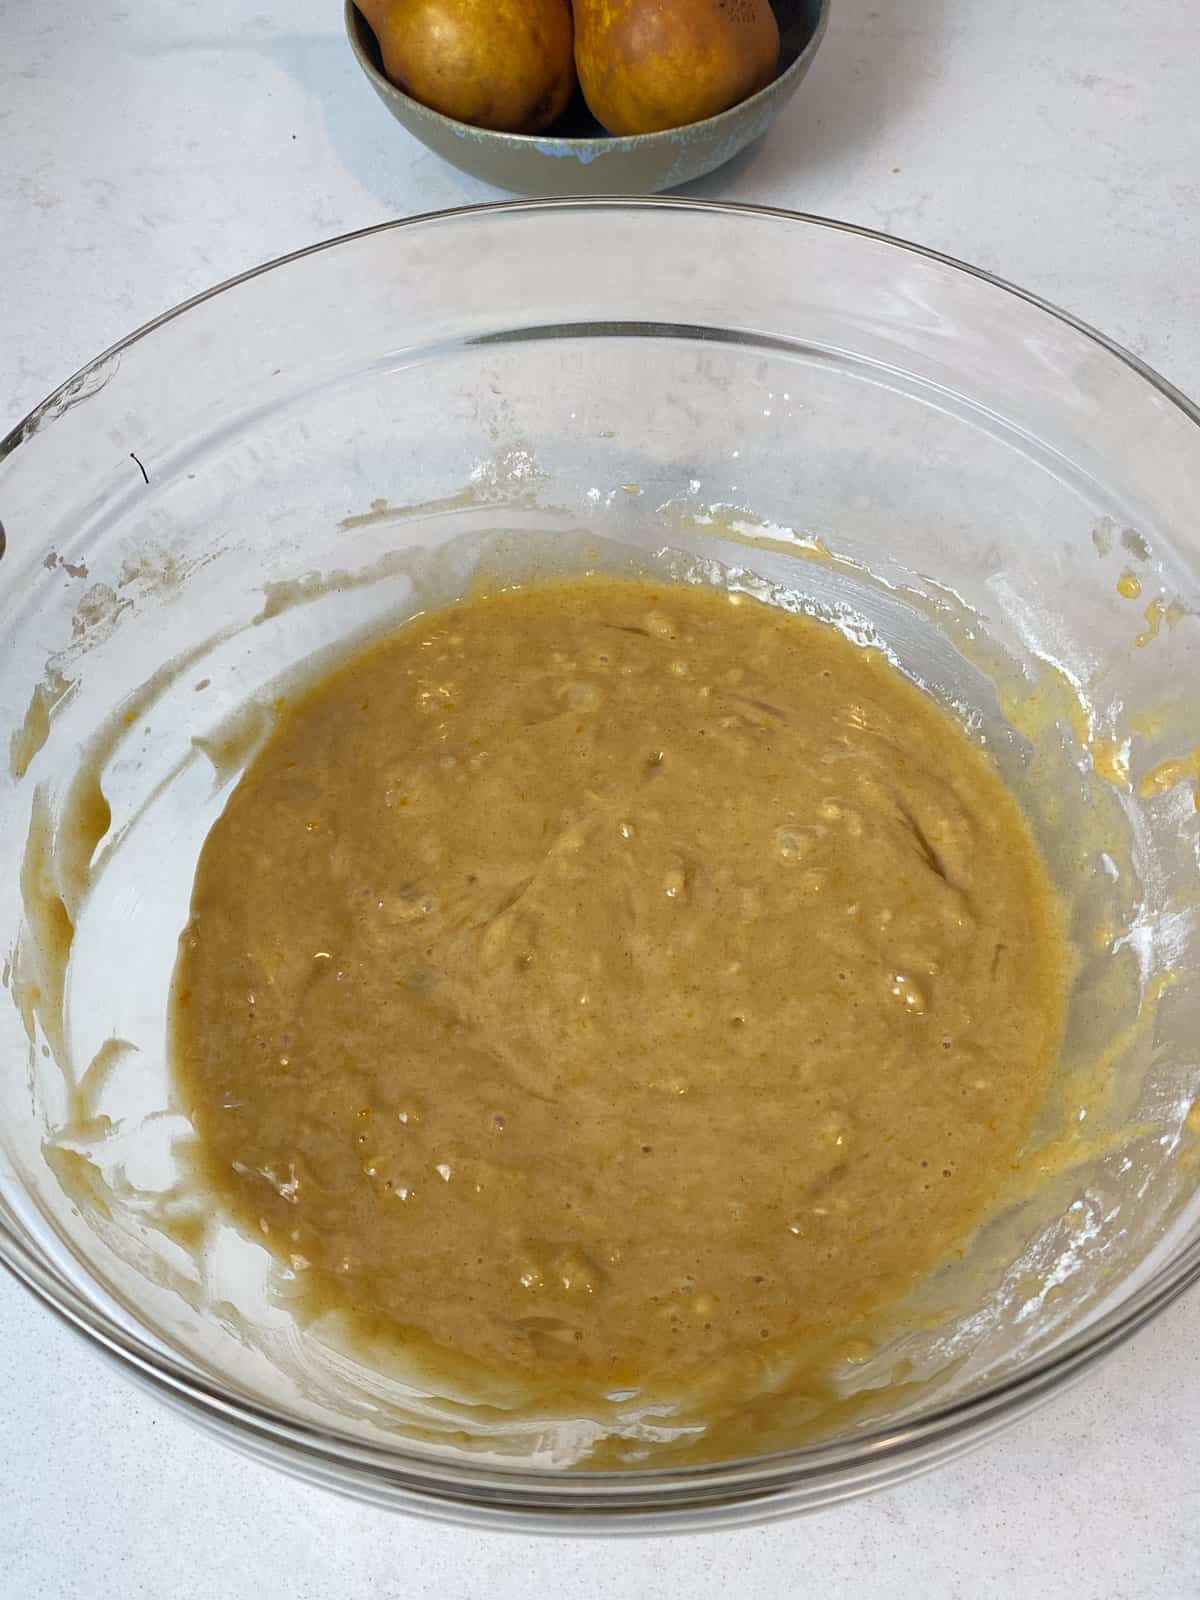 Mix the cake batter together until there is no visible flour left.